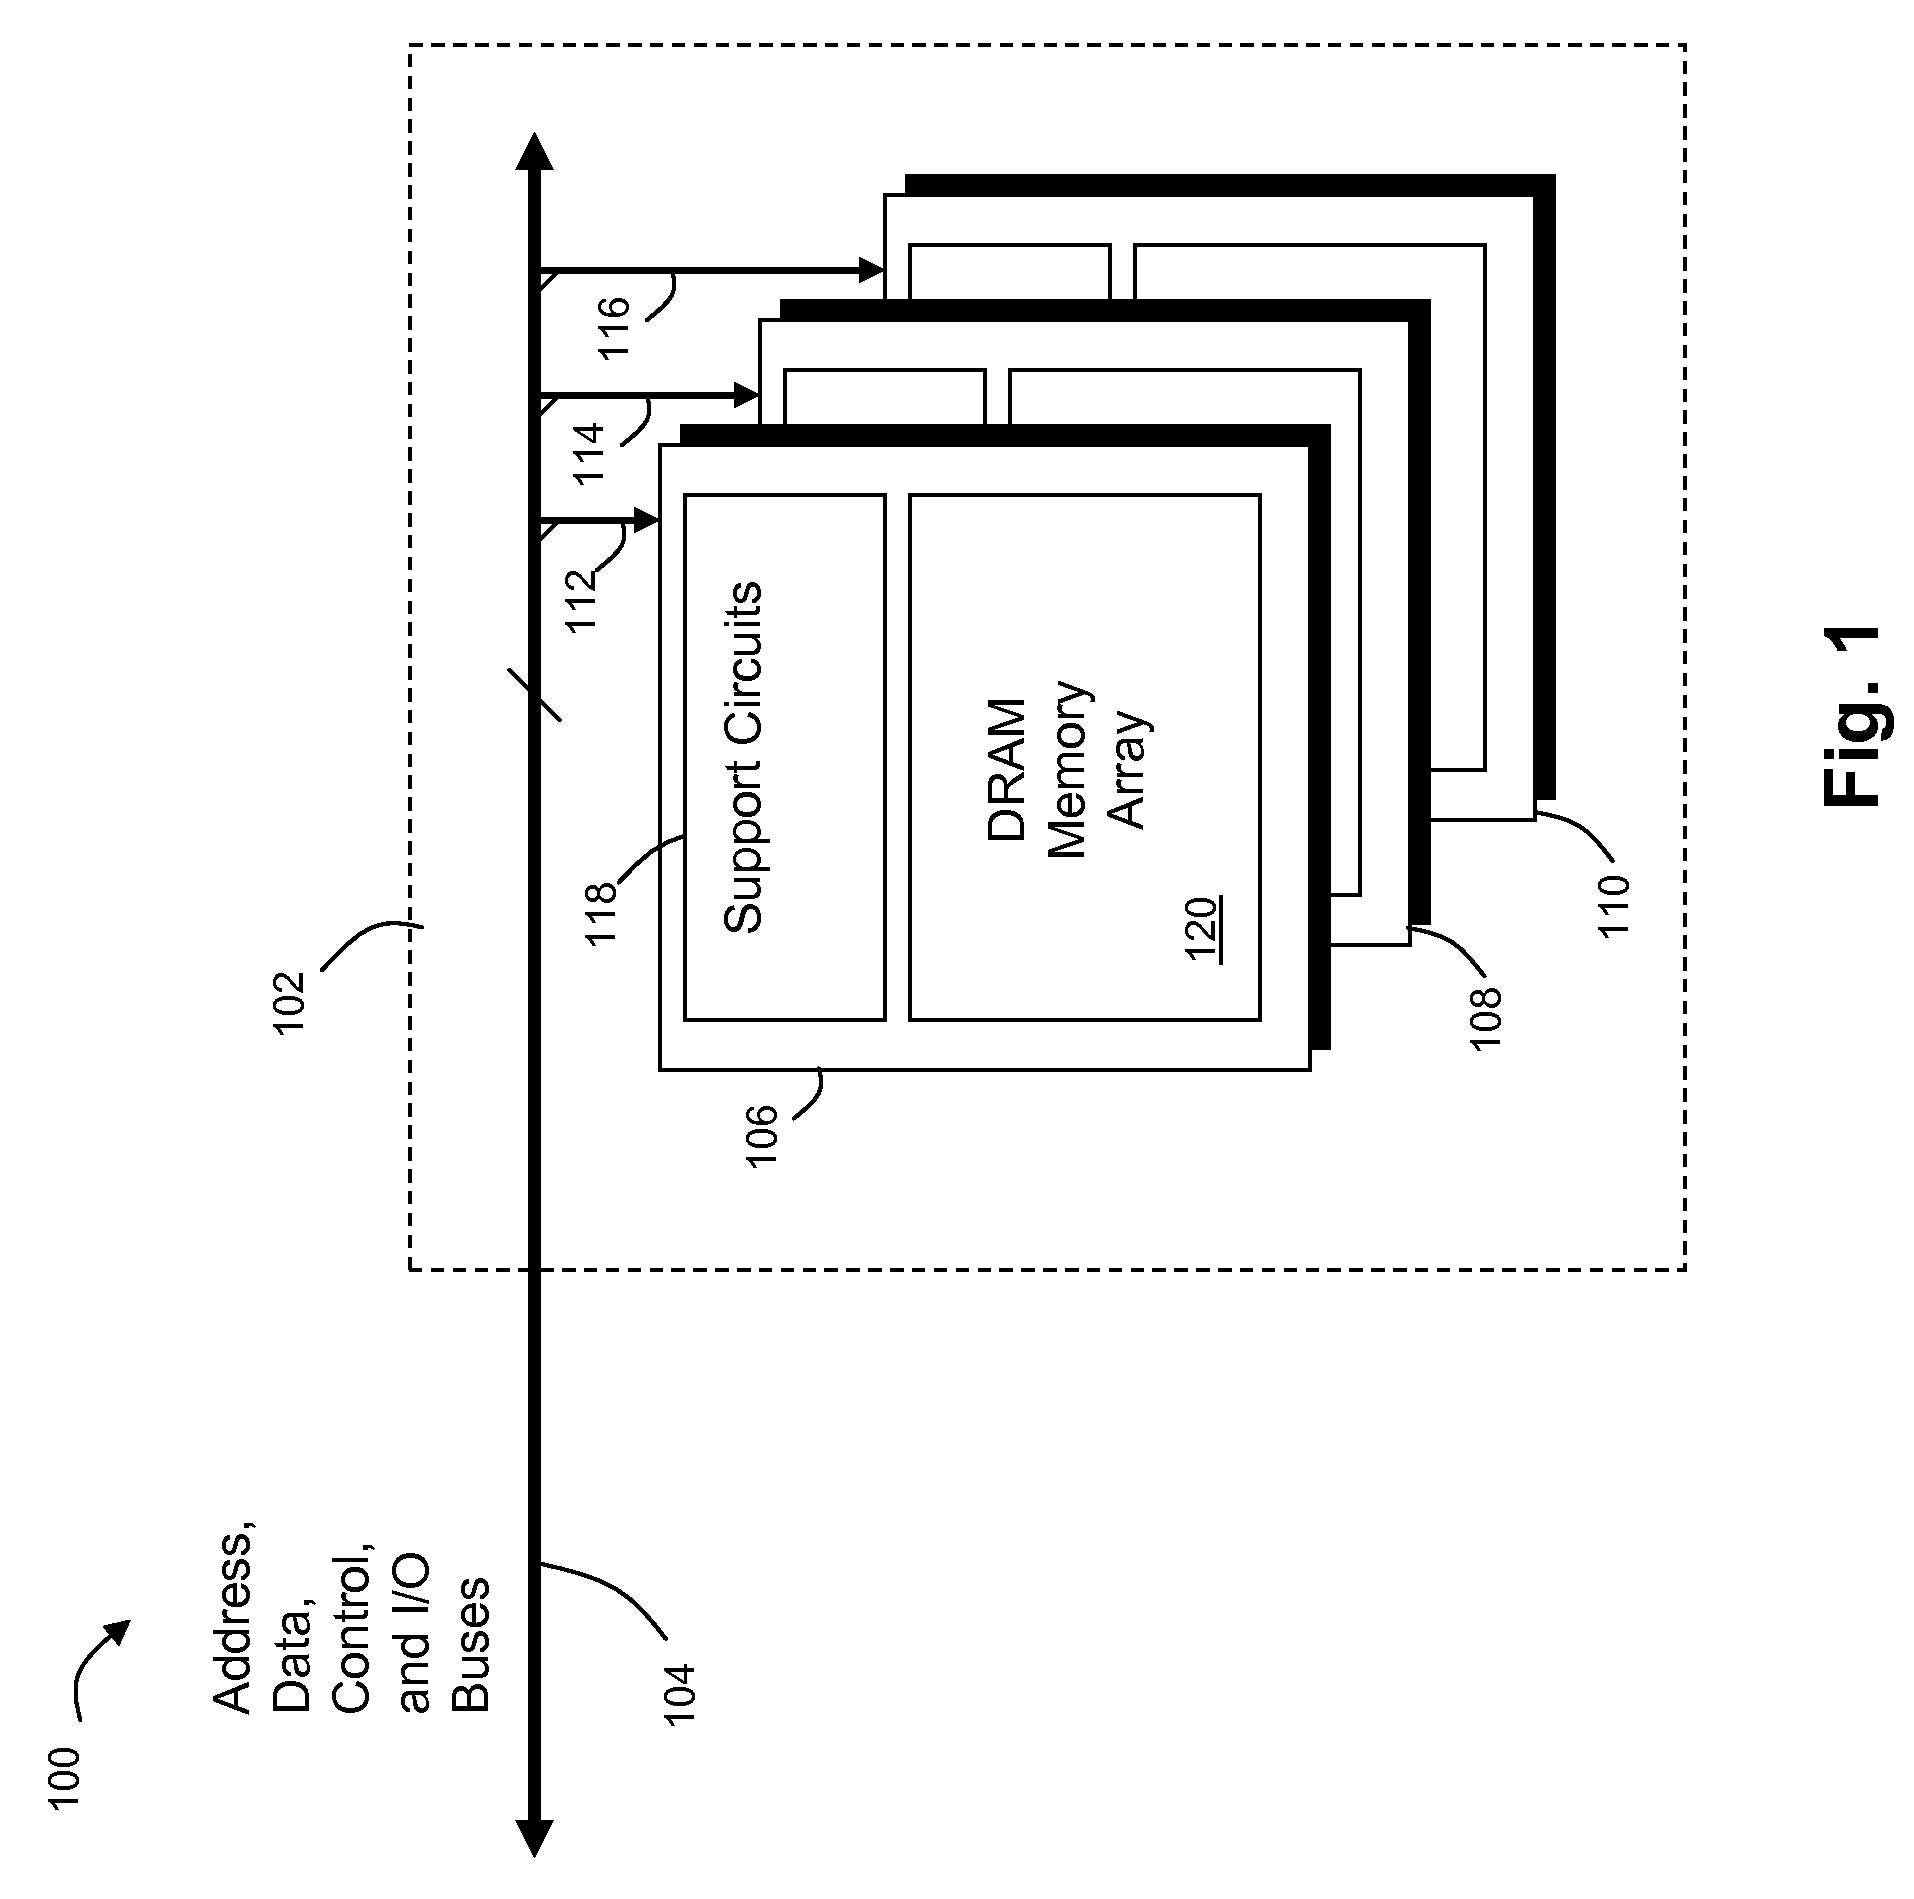 System and Method for Packaged Memory